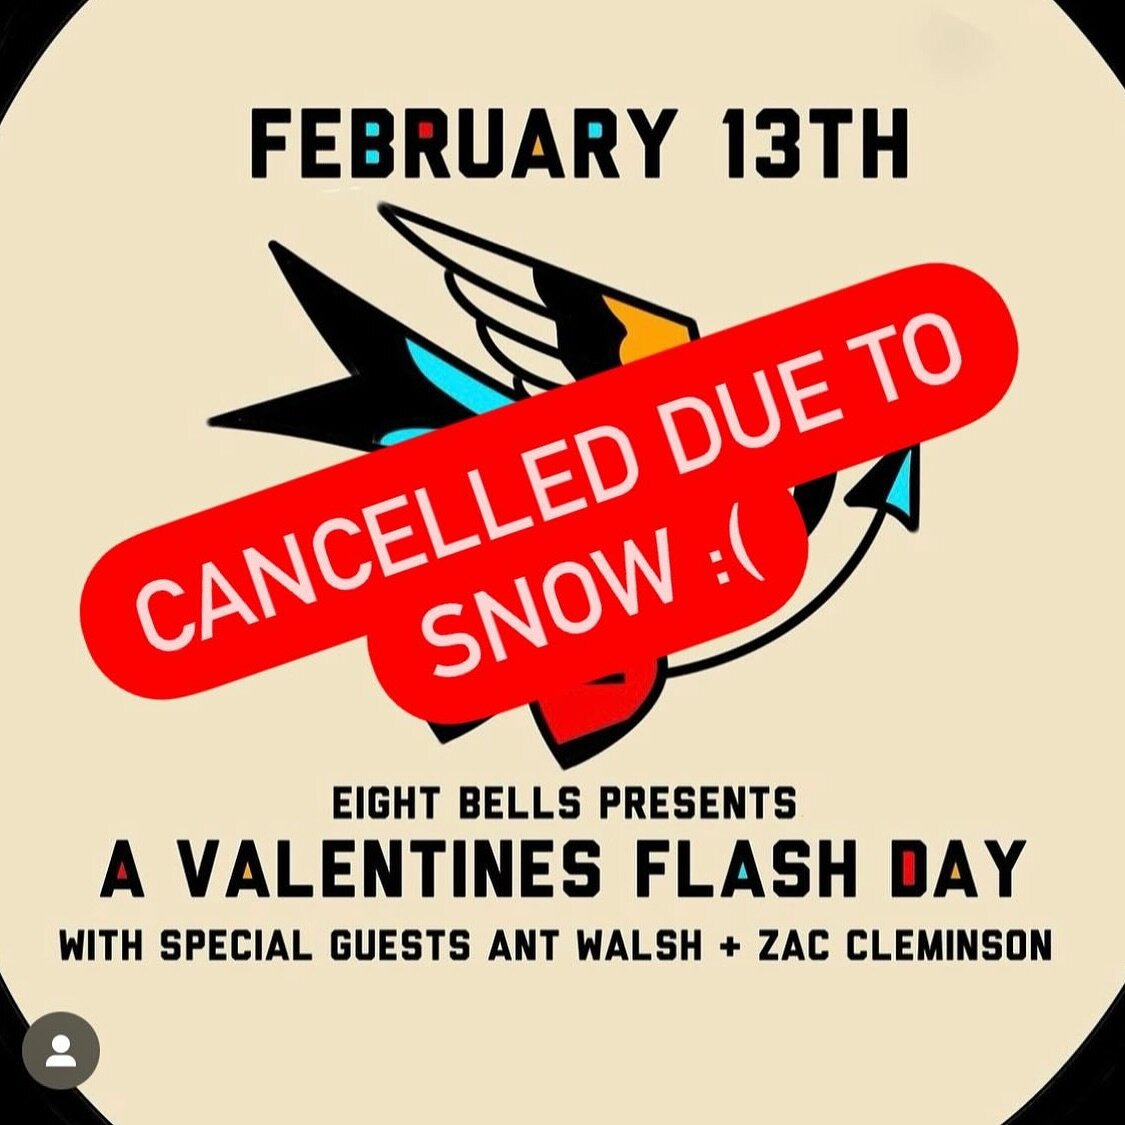 Suuuuuper bummed to announce that our flash event today will be cancelled due to snow :(